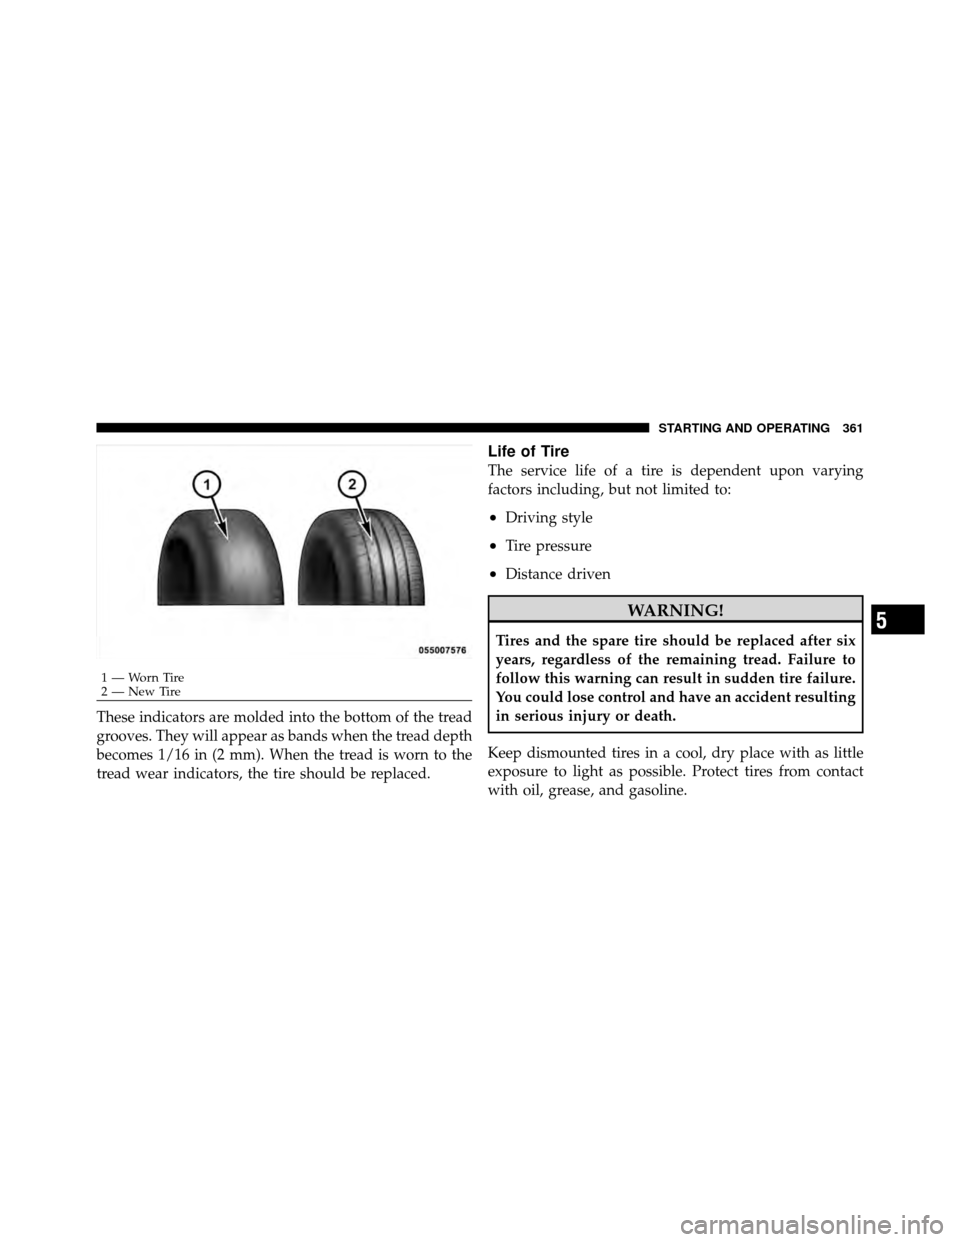 CHRYSLER 300 2010 1.G Owners Manual These indicators are molded into the bottom of the tread
grooves. They will appear as bands when the tread depth
becomes 1/16 in (2 mm). When the tread is worn to the
tread wear indicators, the tire s